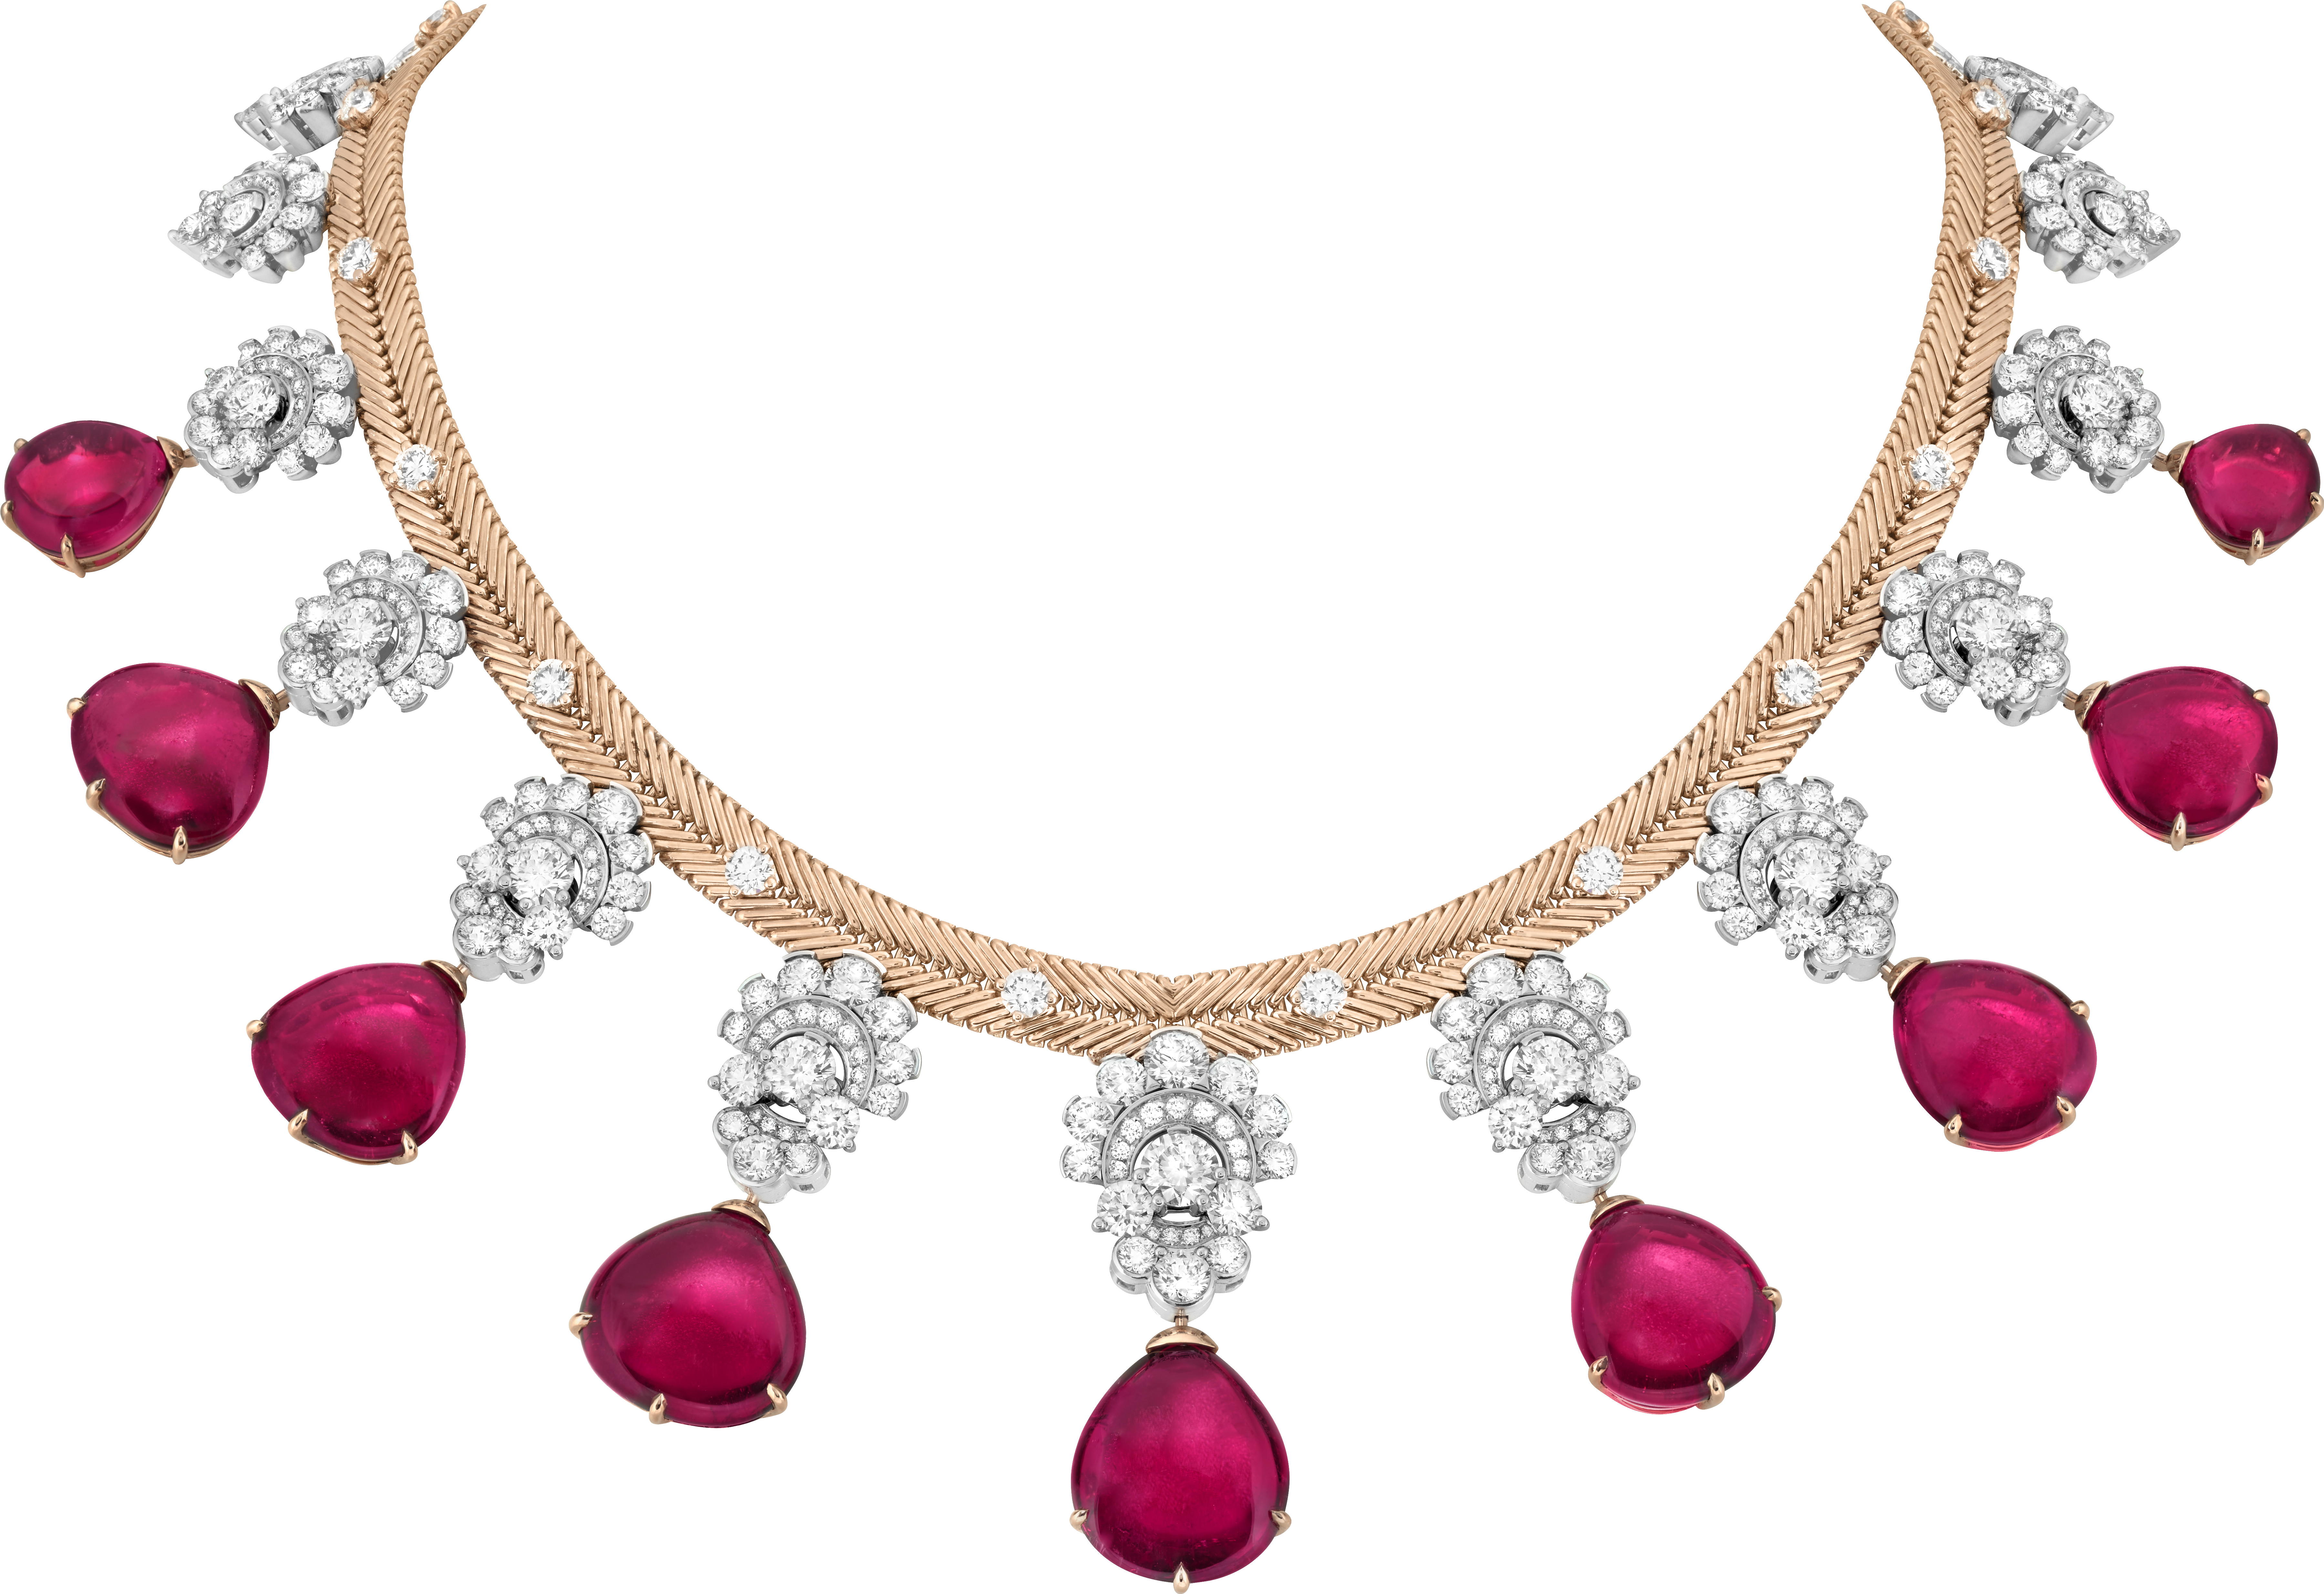 Van Cleef & Arpels Takes a Journey With High Jewelry